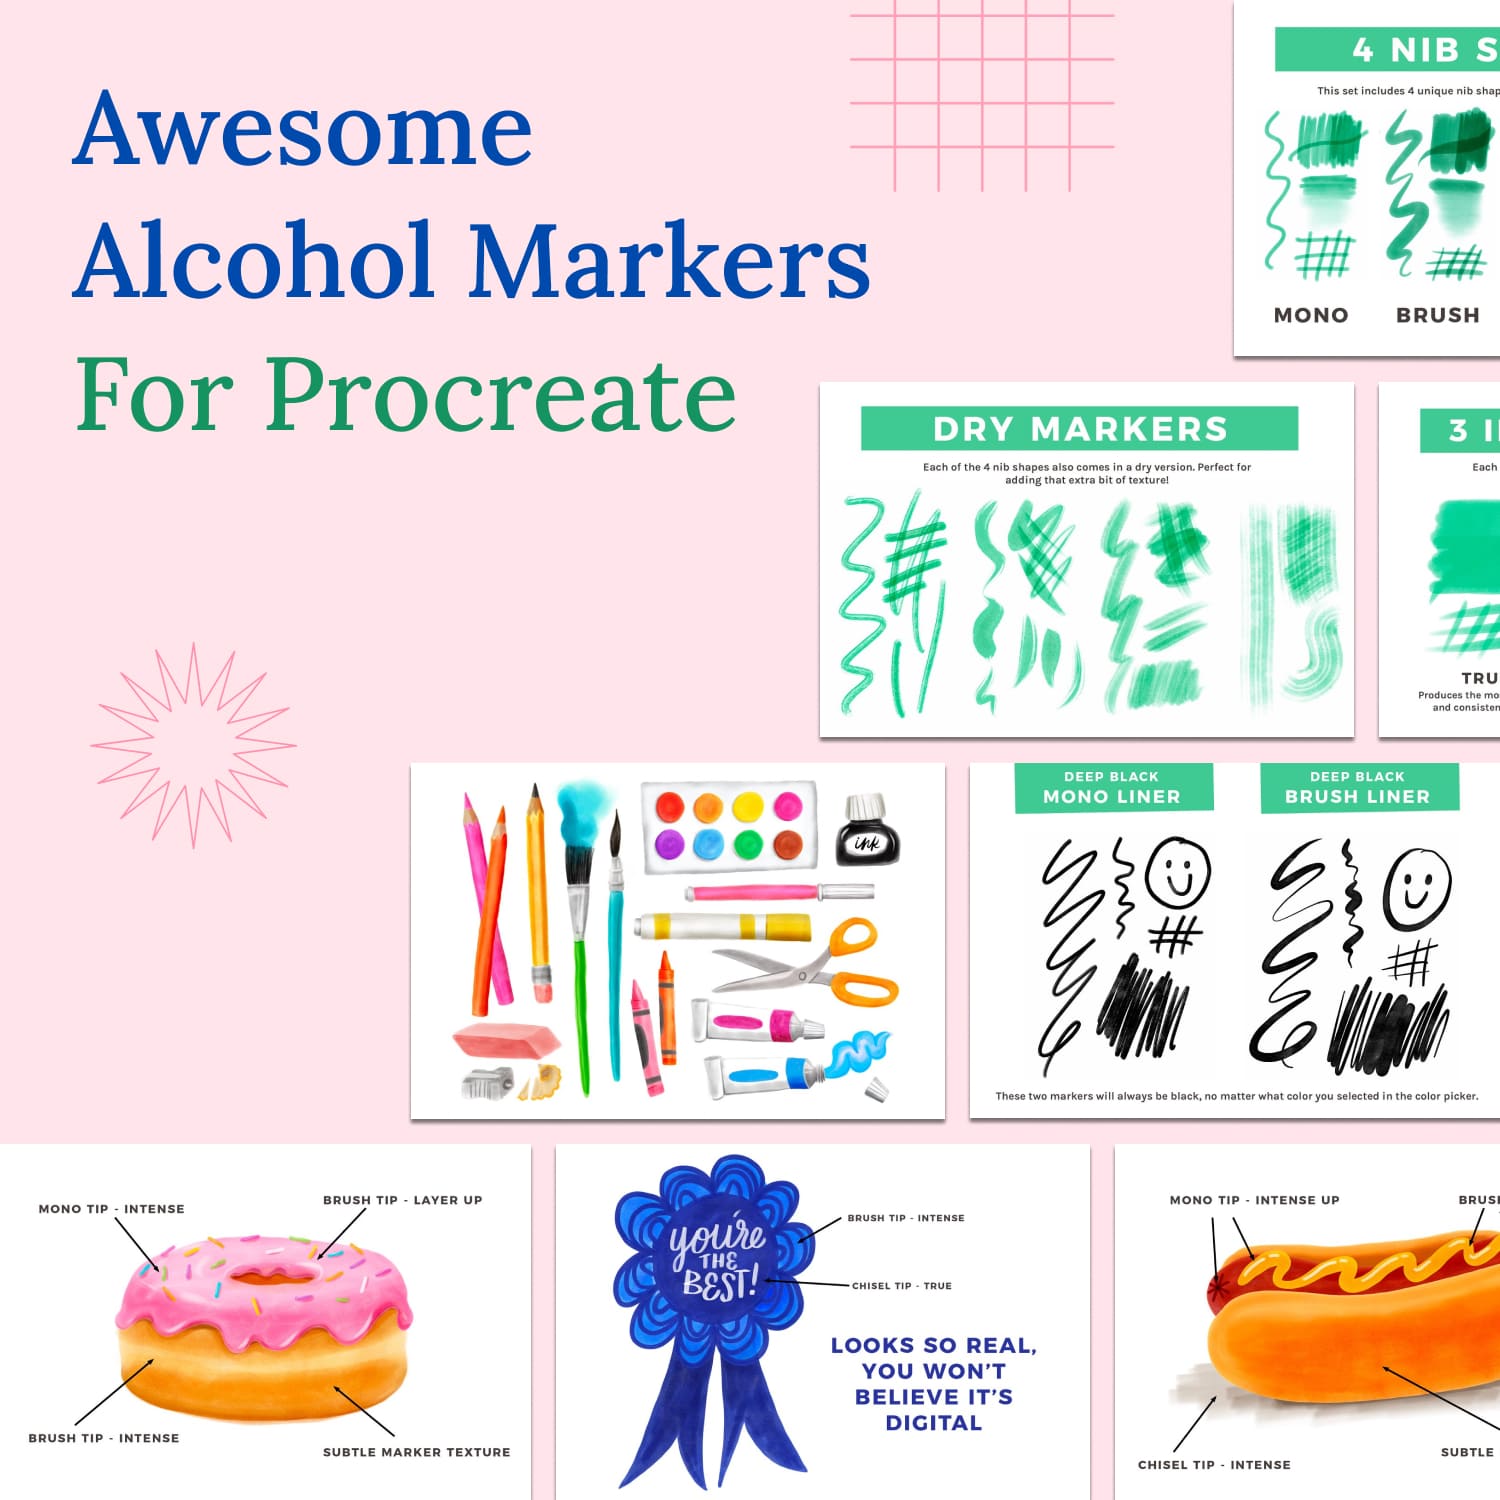 Awesome Alcohol Markers - Procreate.